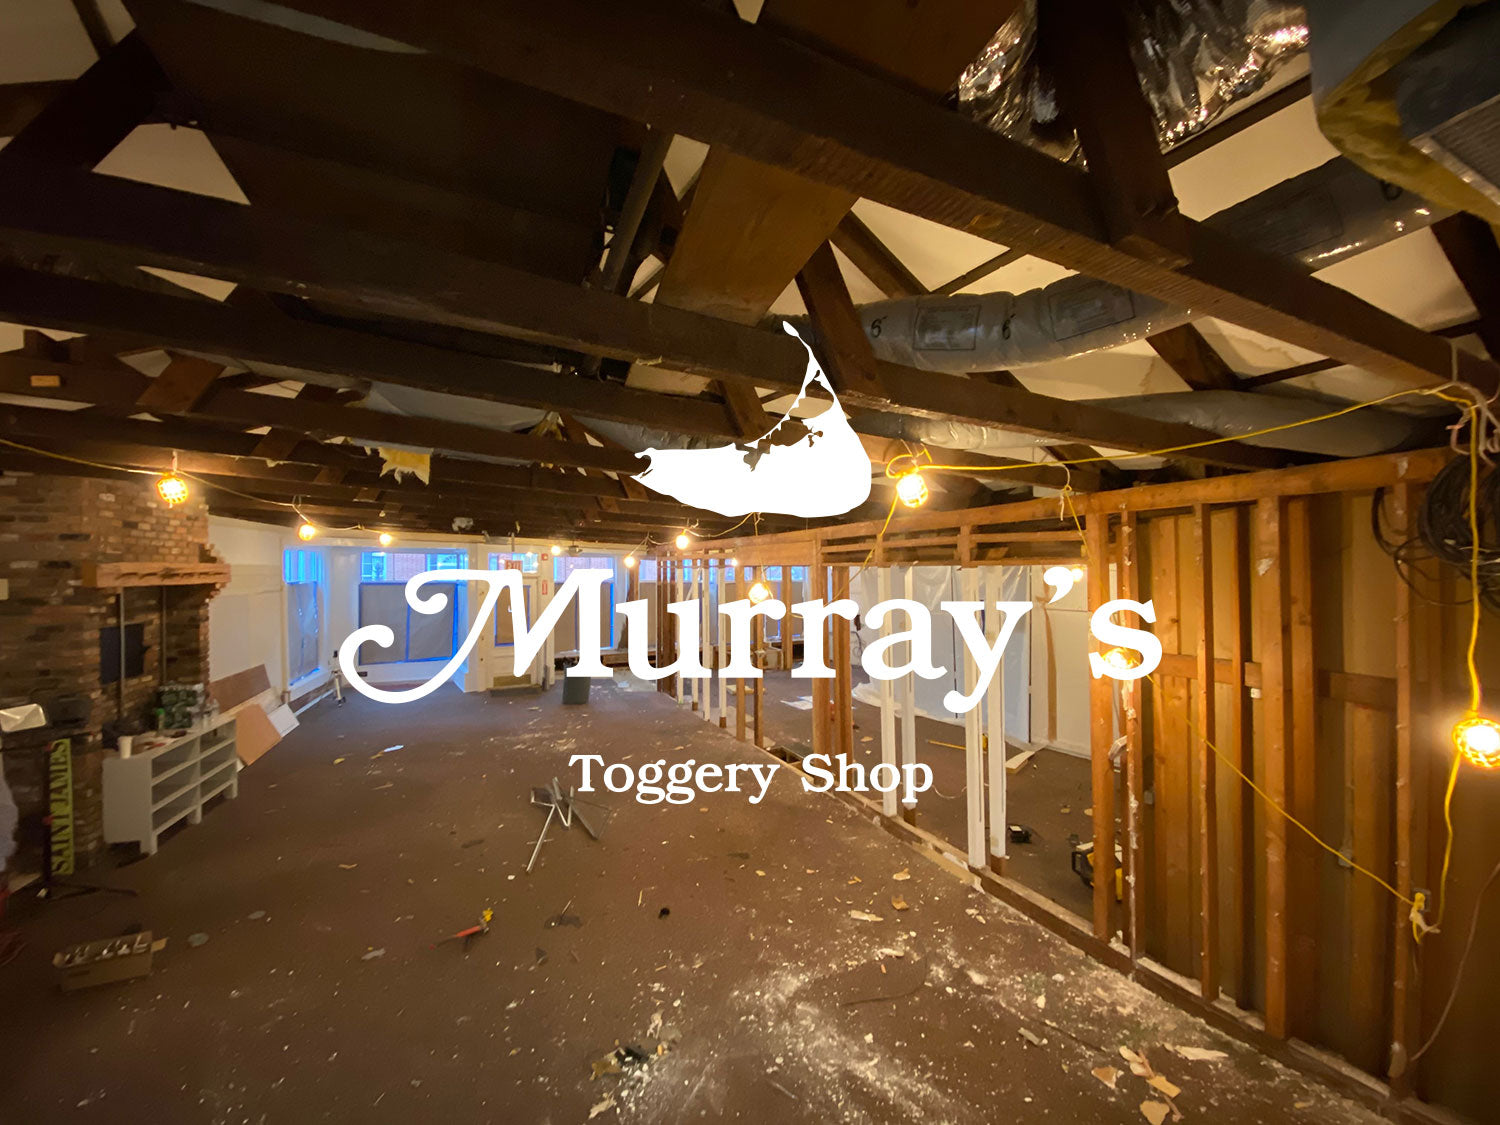 Building a Better Shopping Experience on Nantucket | Murray’s Toggery Shop 2020 Renovation